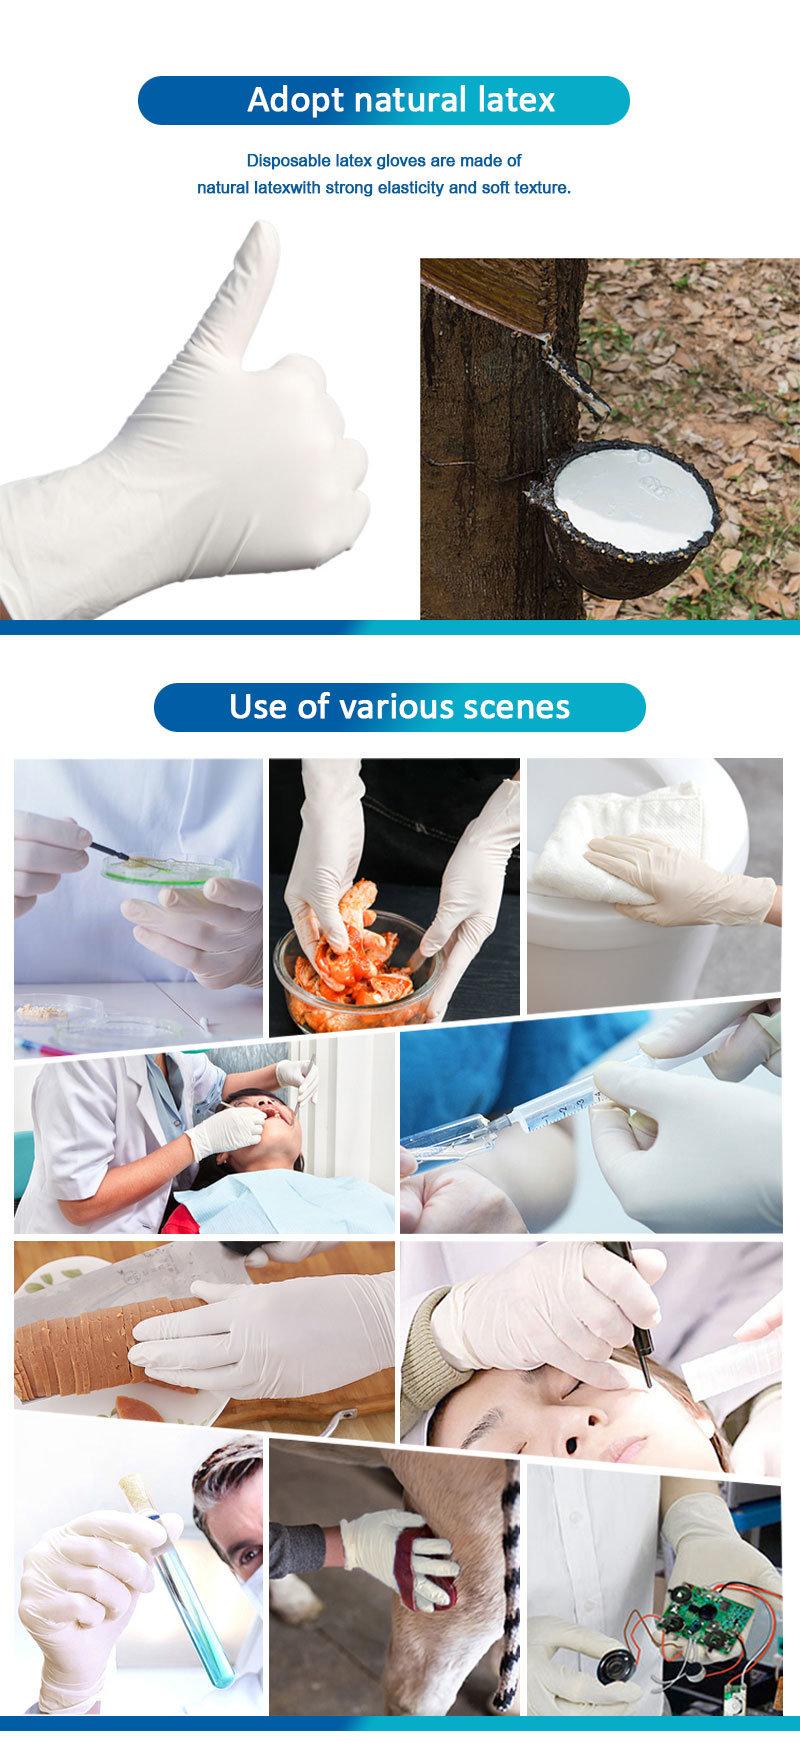 High Quality Disposable Latex Nitrile Gloves Oil Proof for Food Factory and Laboratory Usage